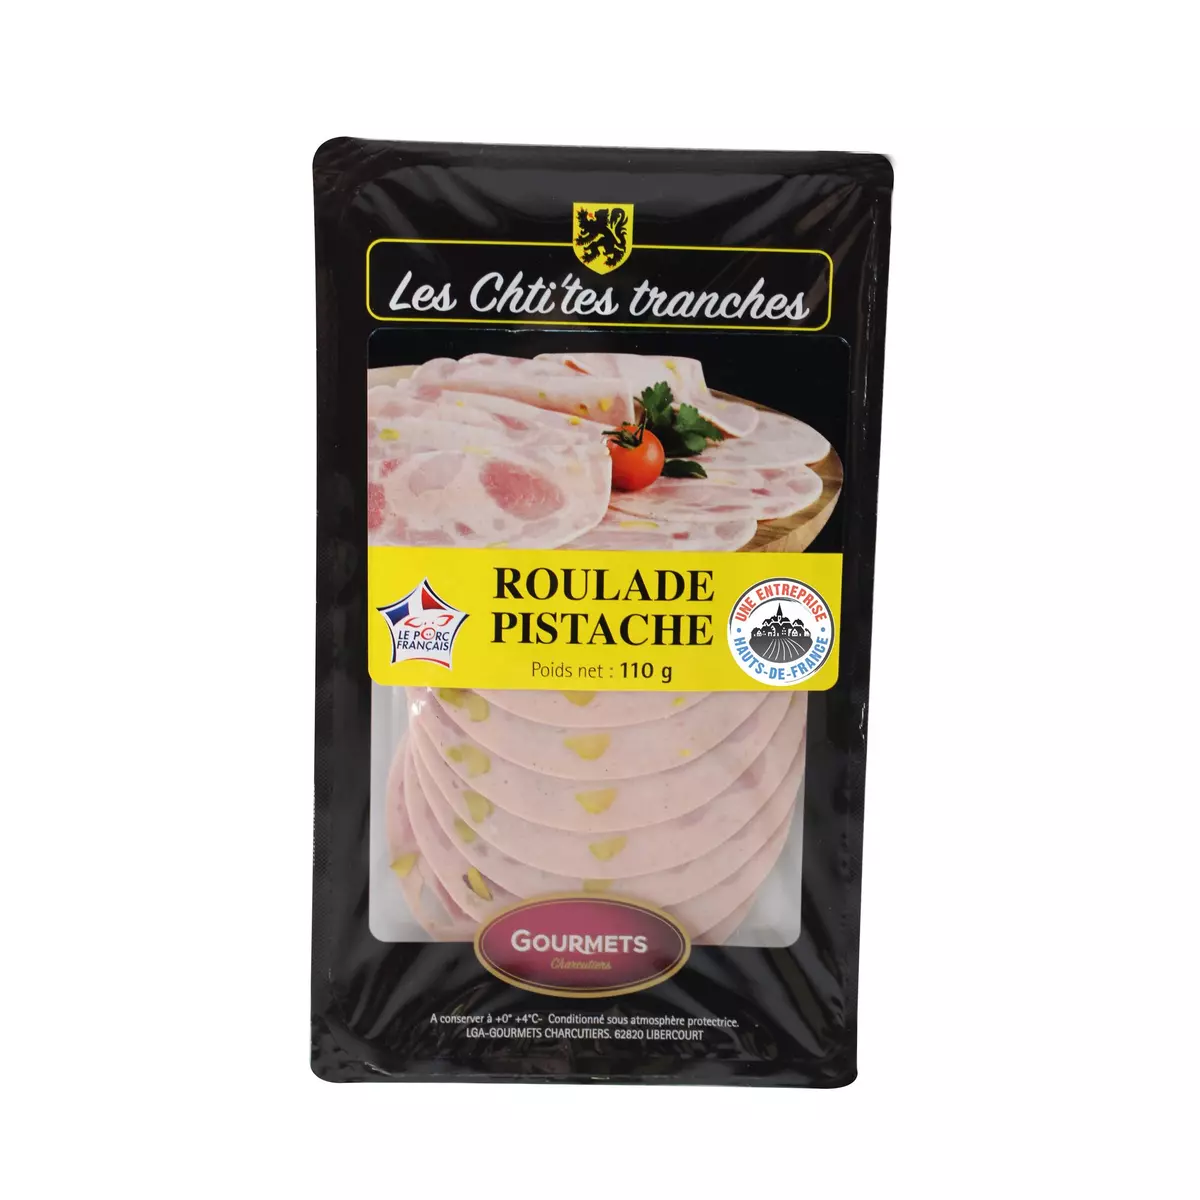 LES CHTI'TES TRANCHES Roulade pistache 110g